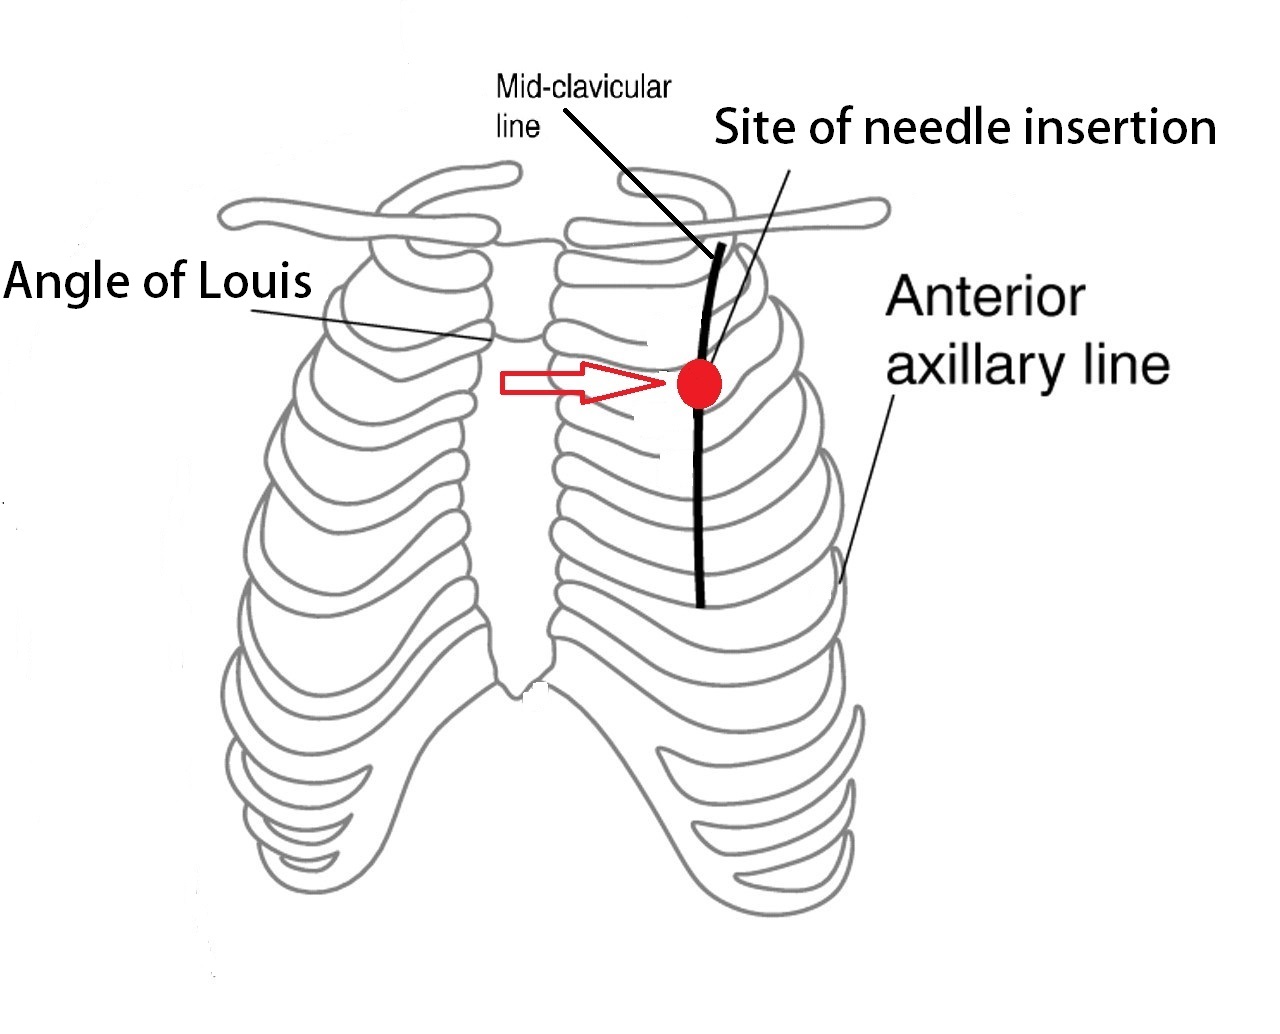 File:Site of needle insertion - 1.jpg